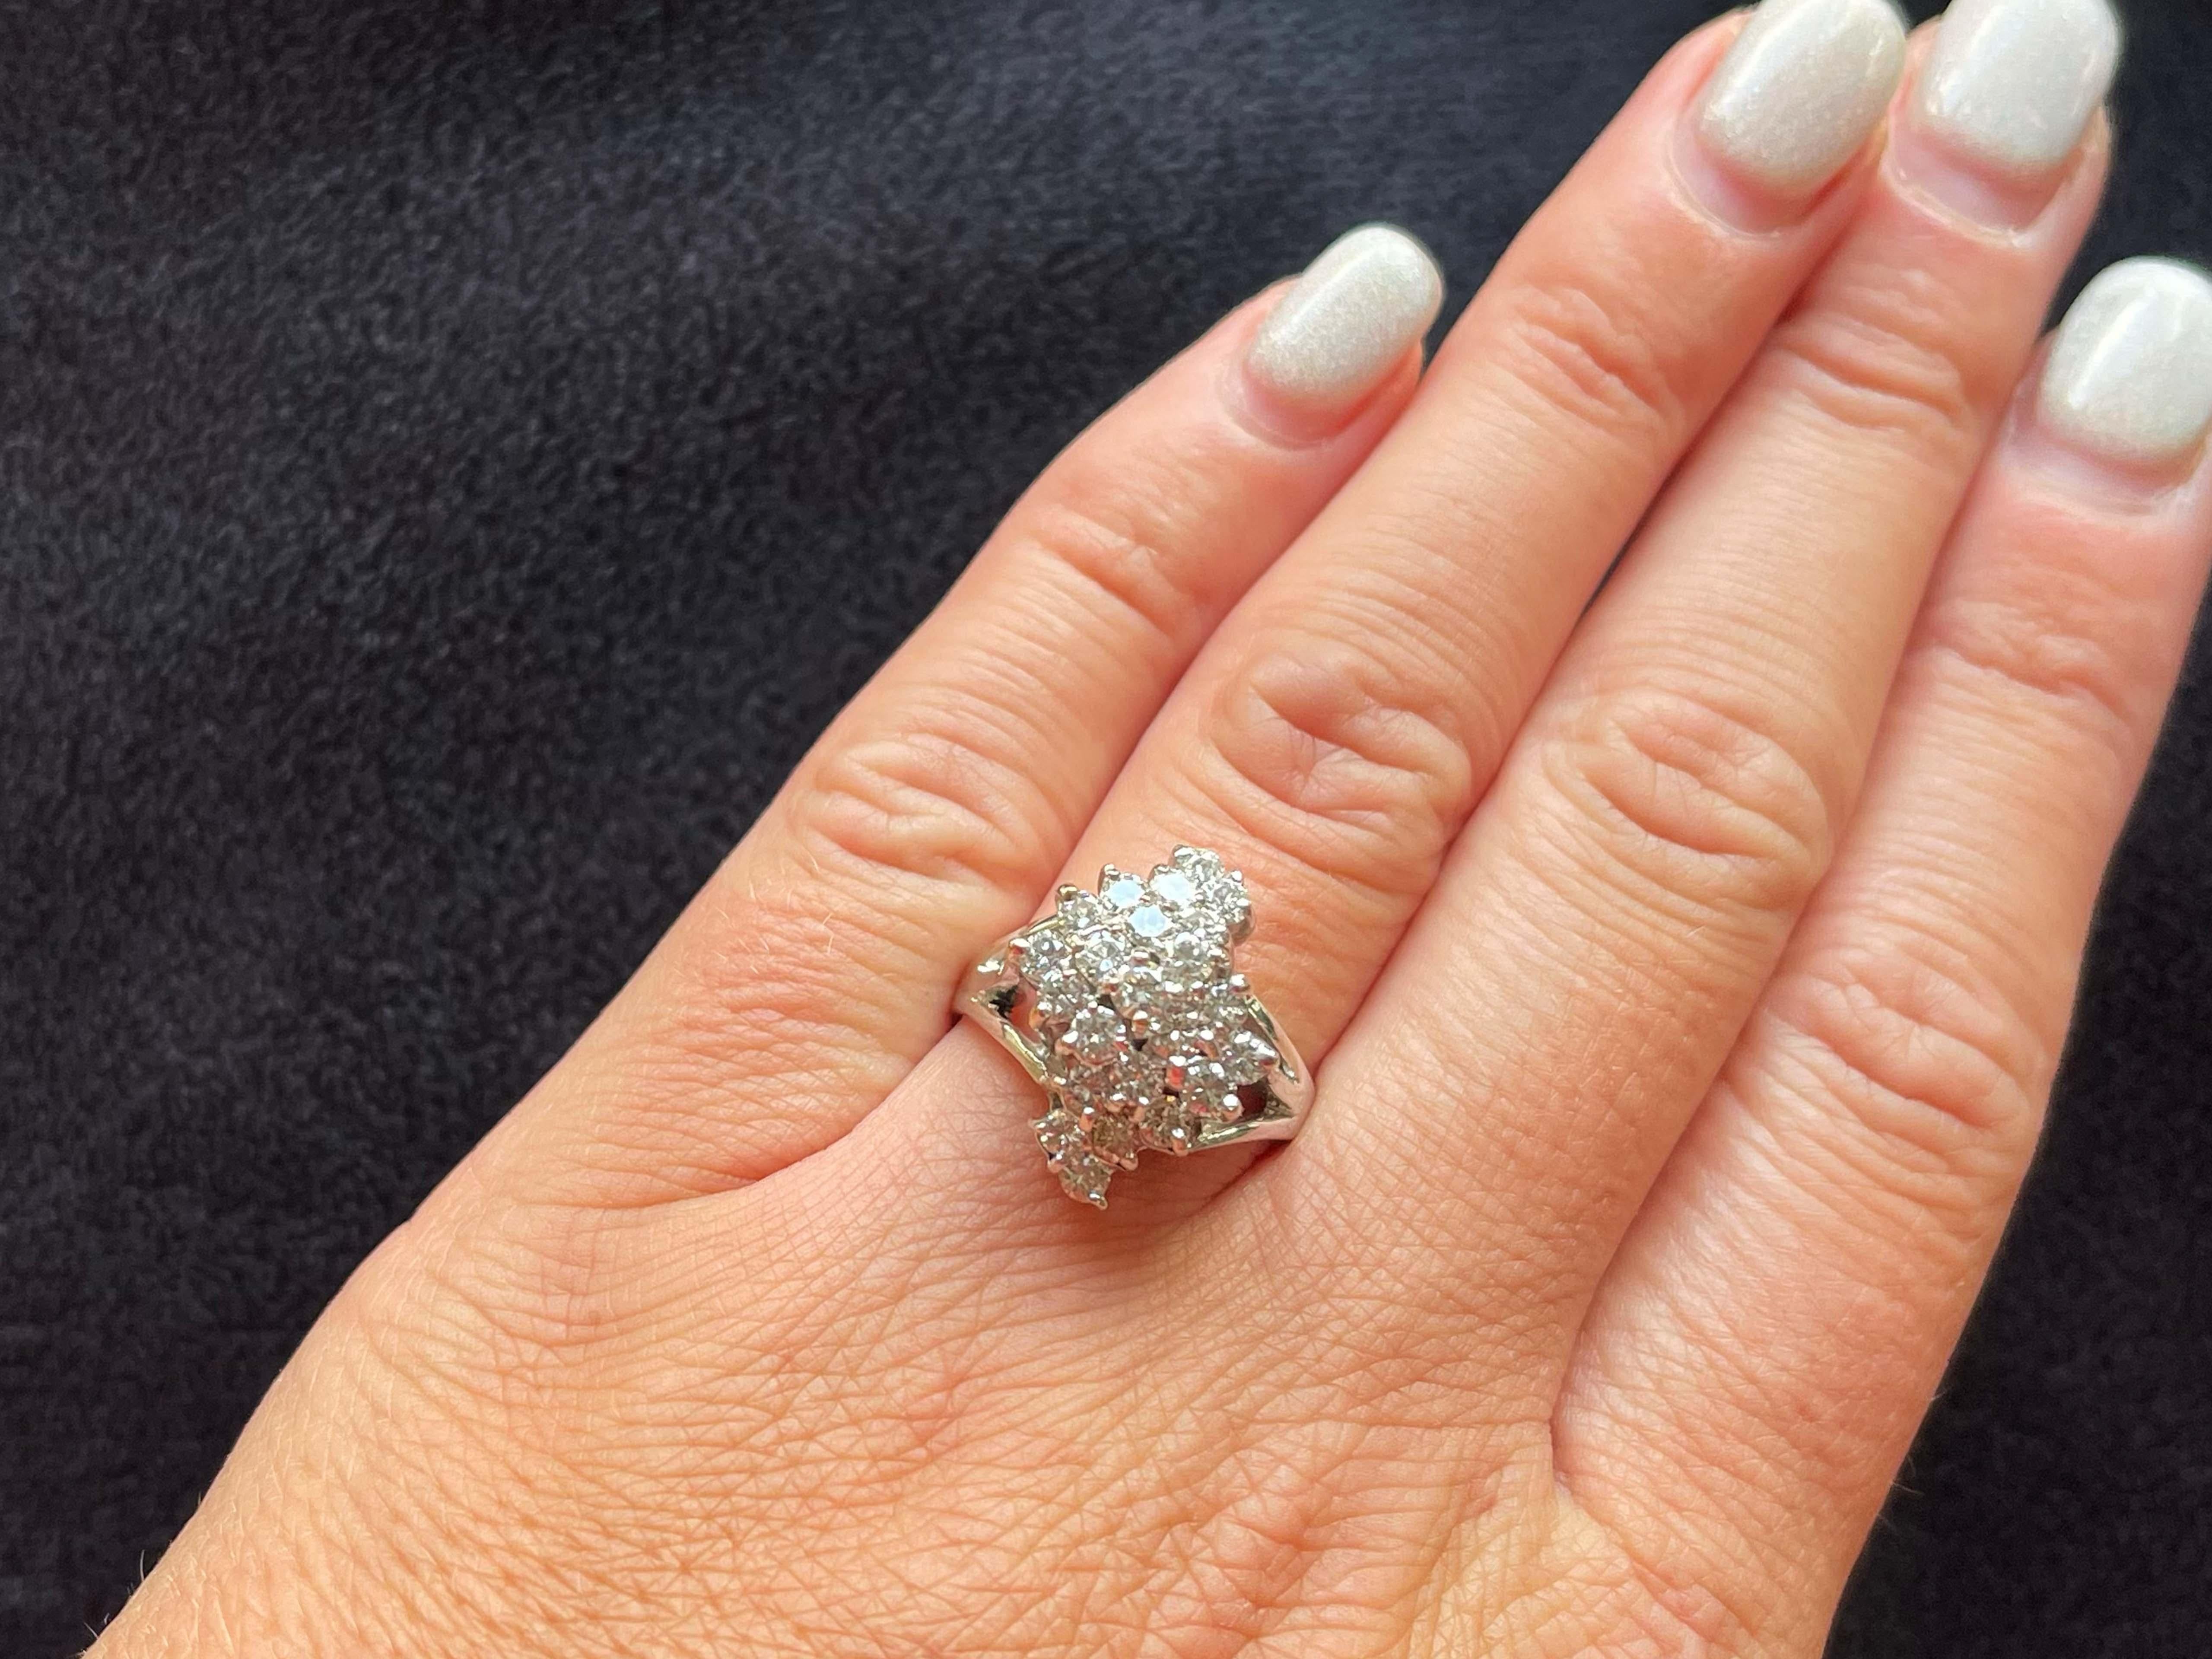 Item Specifications:

Metal: 14k White Gold 
​
​Diamond Count: 23 brilliant cut 

Diamond Carat Weight: 1.20 carats

Diamond Color: G-H

Diamond Clarity: VS1-SI1

Ring Size: 8.75 (resizable)

Total Weight: 6.0 Grams

Condition: Preowned, Excellent